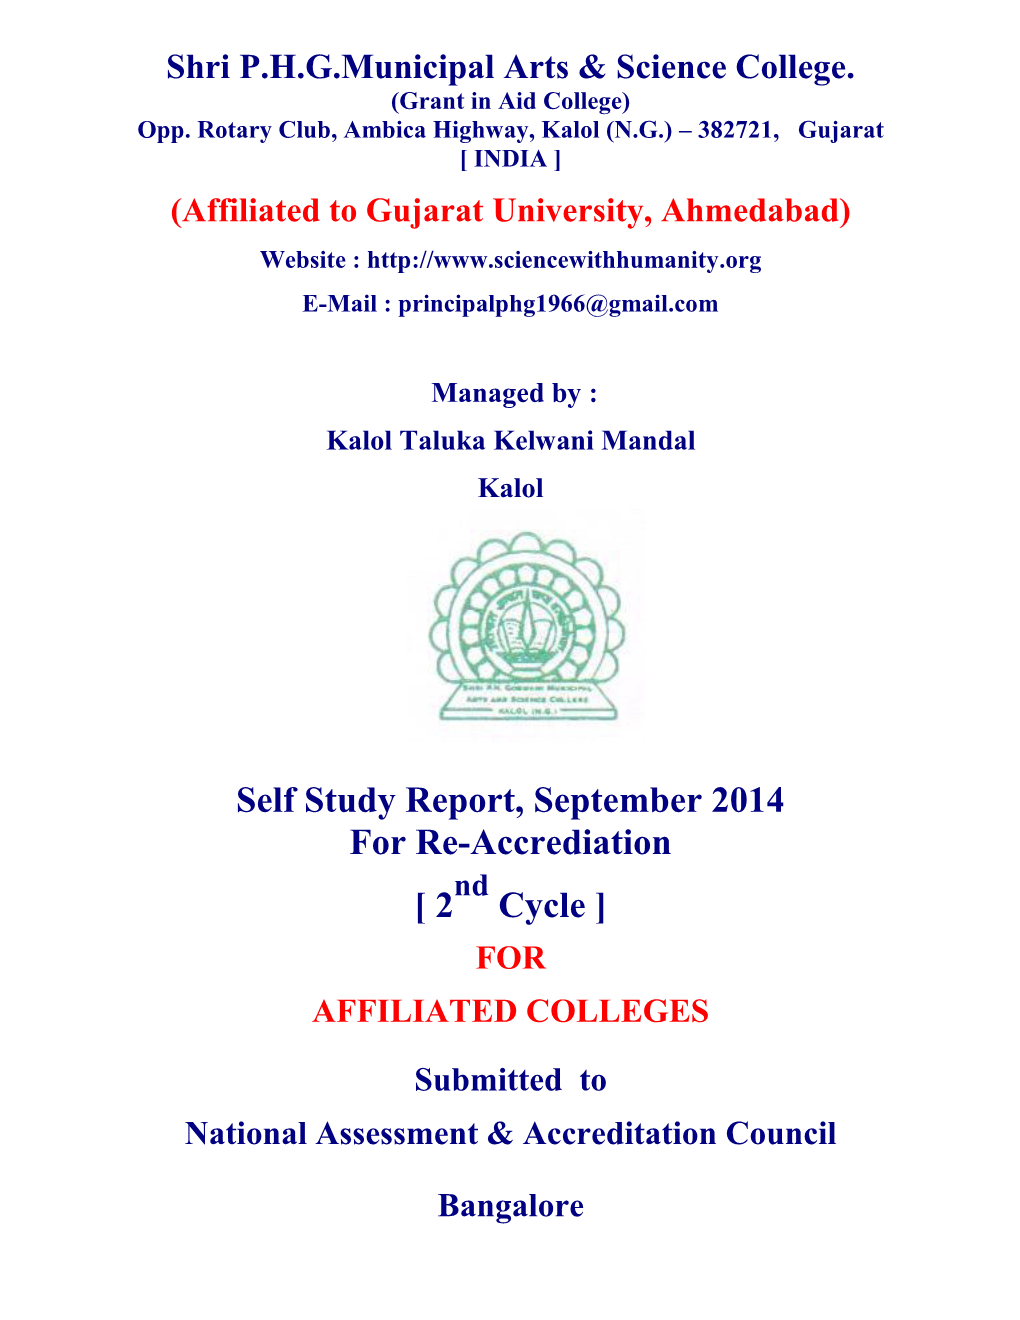 Self Study Report, September 2014 for Re-Accrediation [ 2 Cycle ]